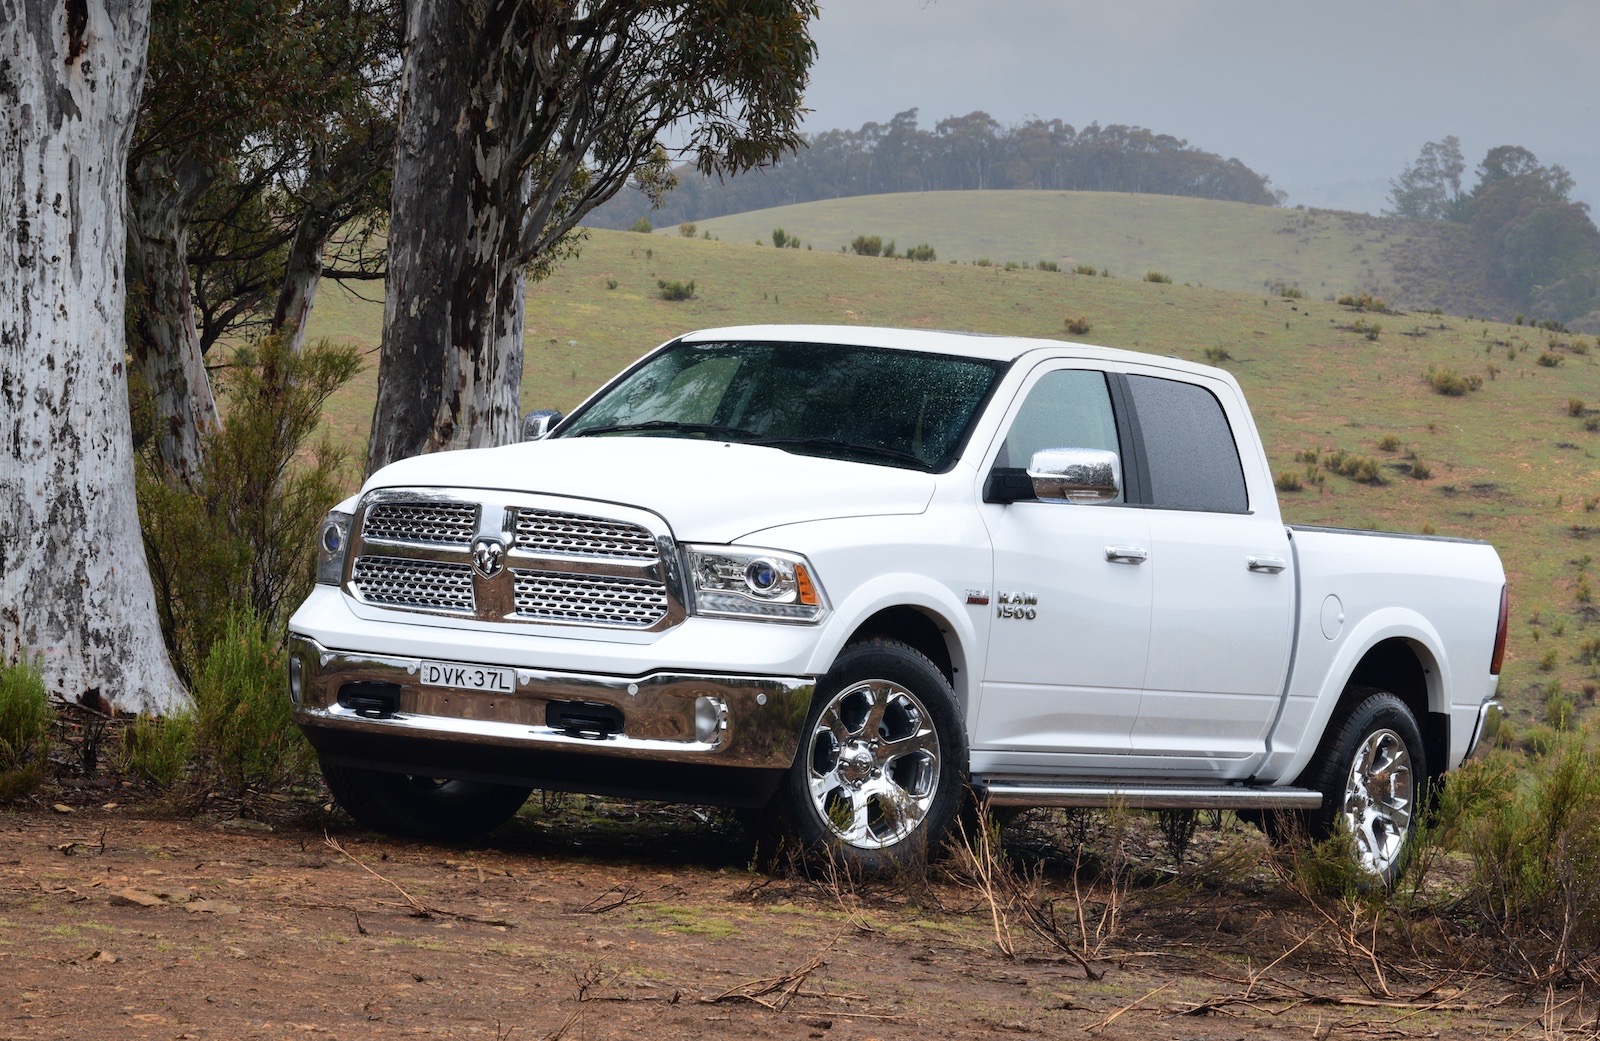 2018 RAM 1500 now on sale in Australia from $79,950